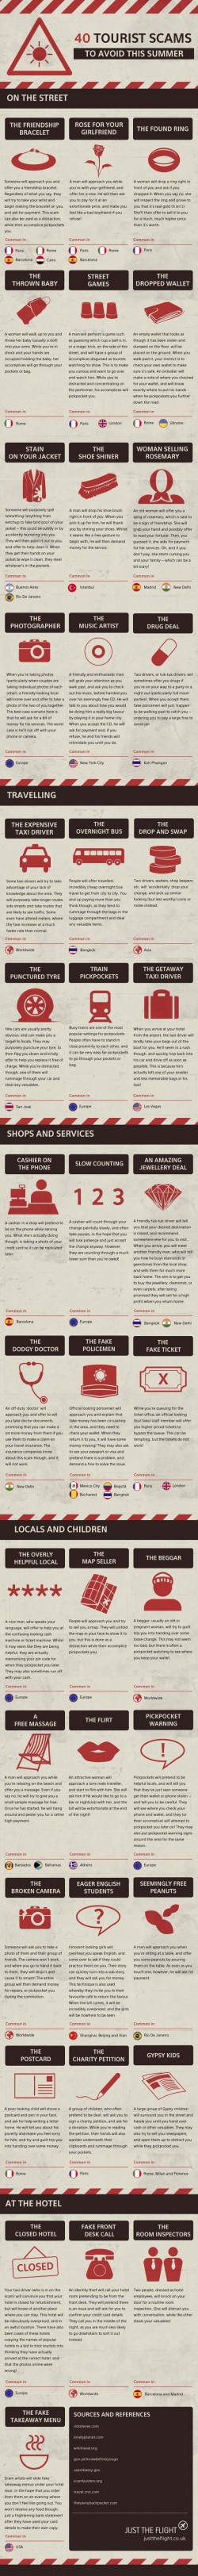 40 Most Notorious Tourist Scams | Daily Infographic